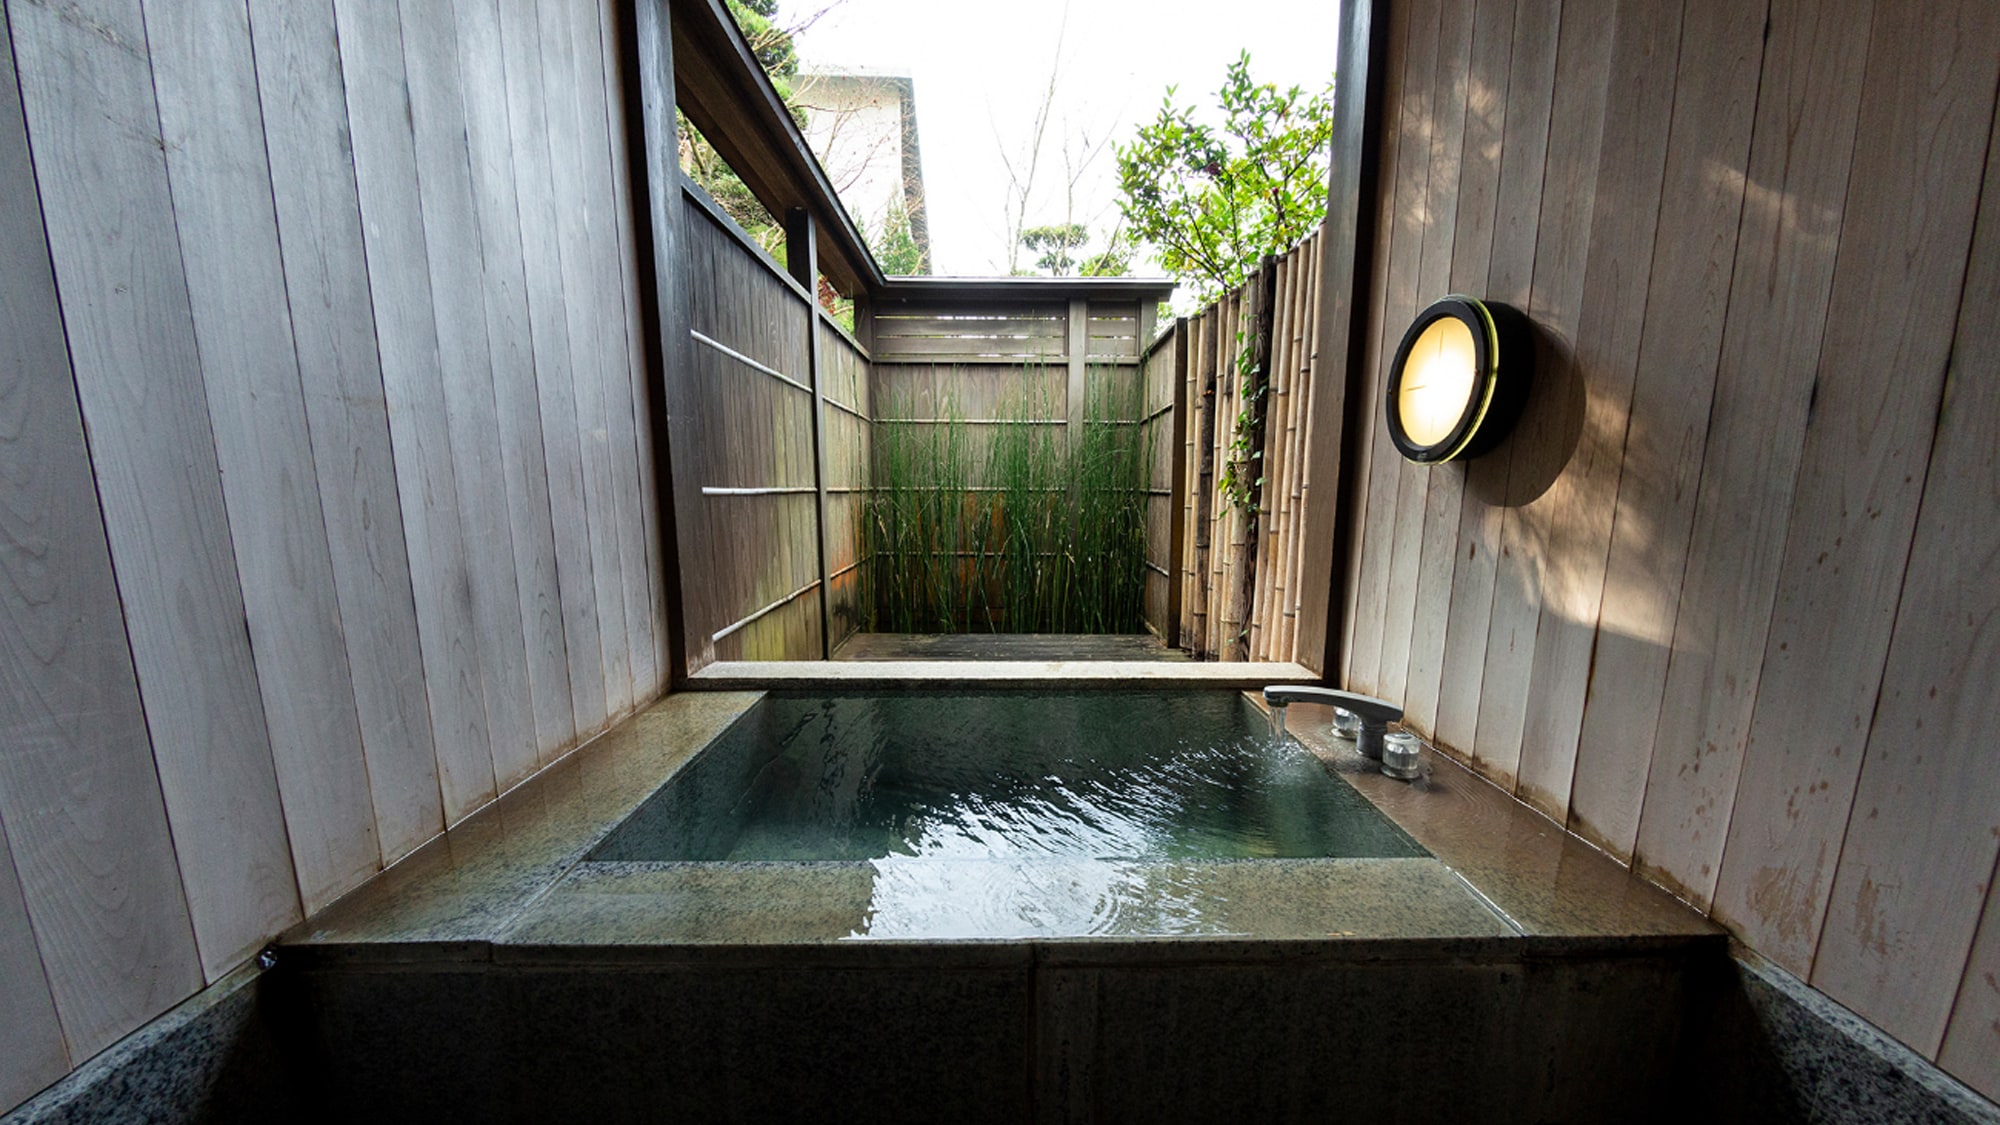 [Suigetsu / Ume] There is also a semi-open-air bath made of stone that flows directly from the source, so you can enjoy a relaxing space.